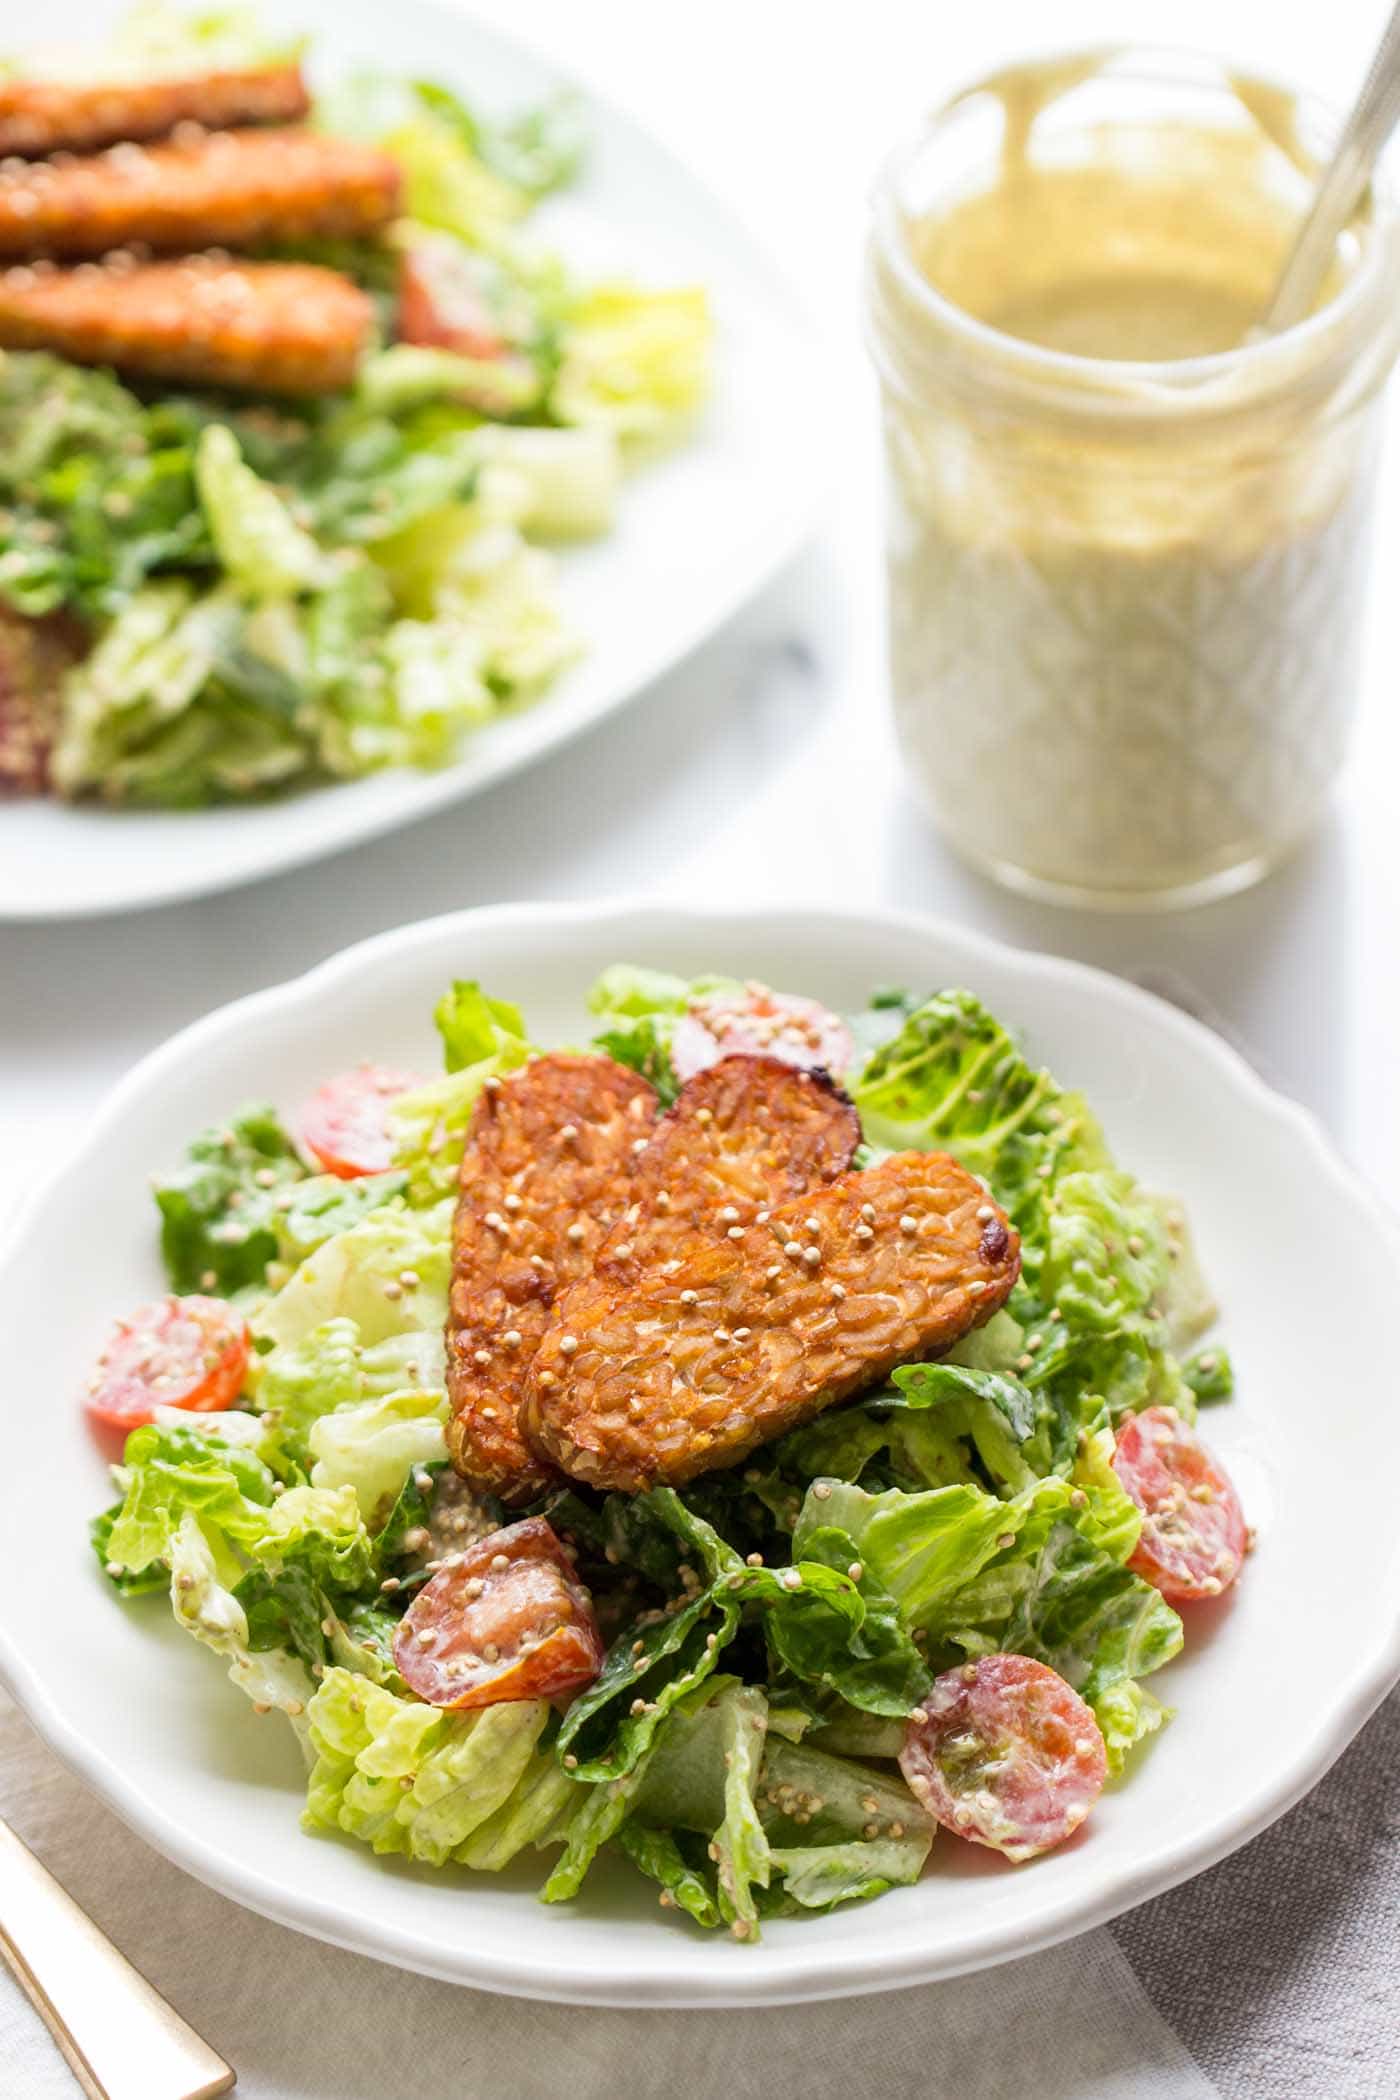 This is the BEST vegan caesar salad I've ever tasted...AND the dressing is nut-free!!